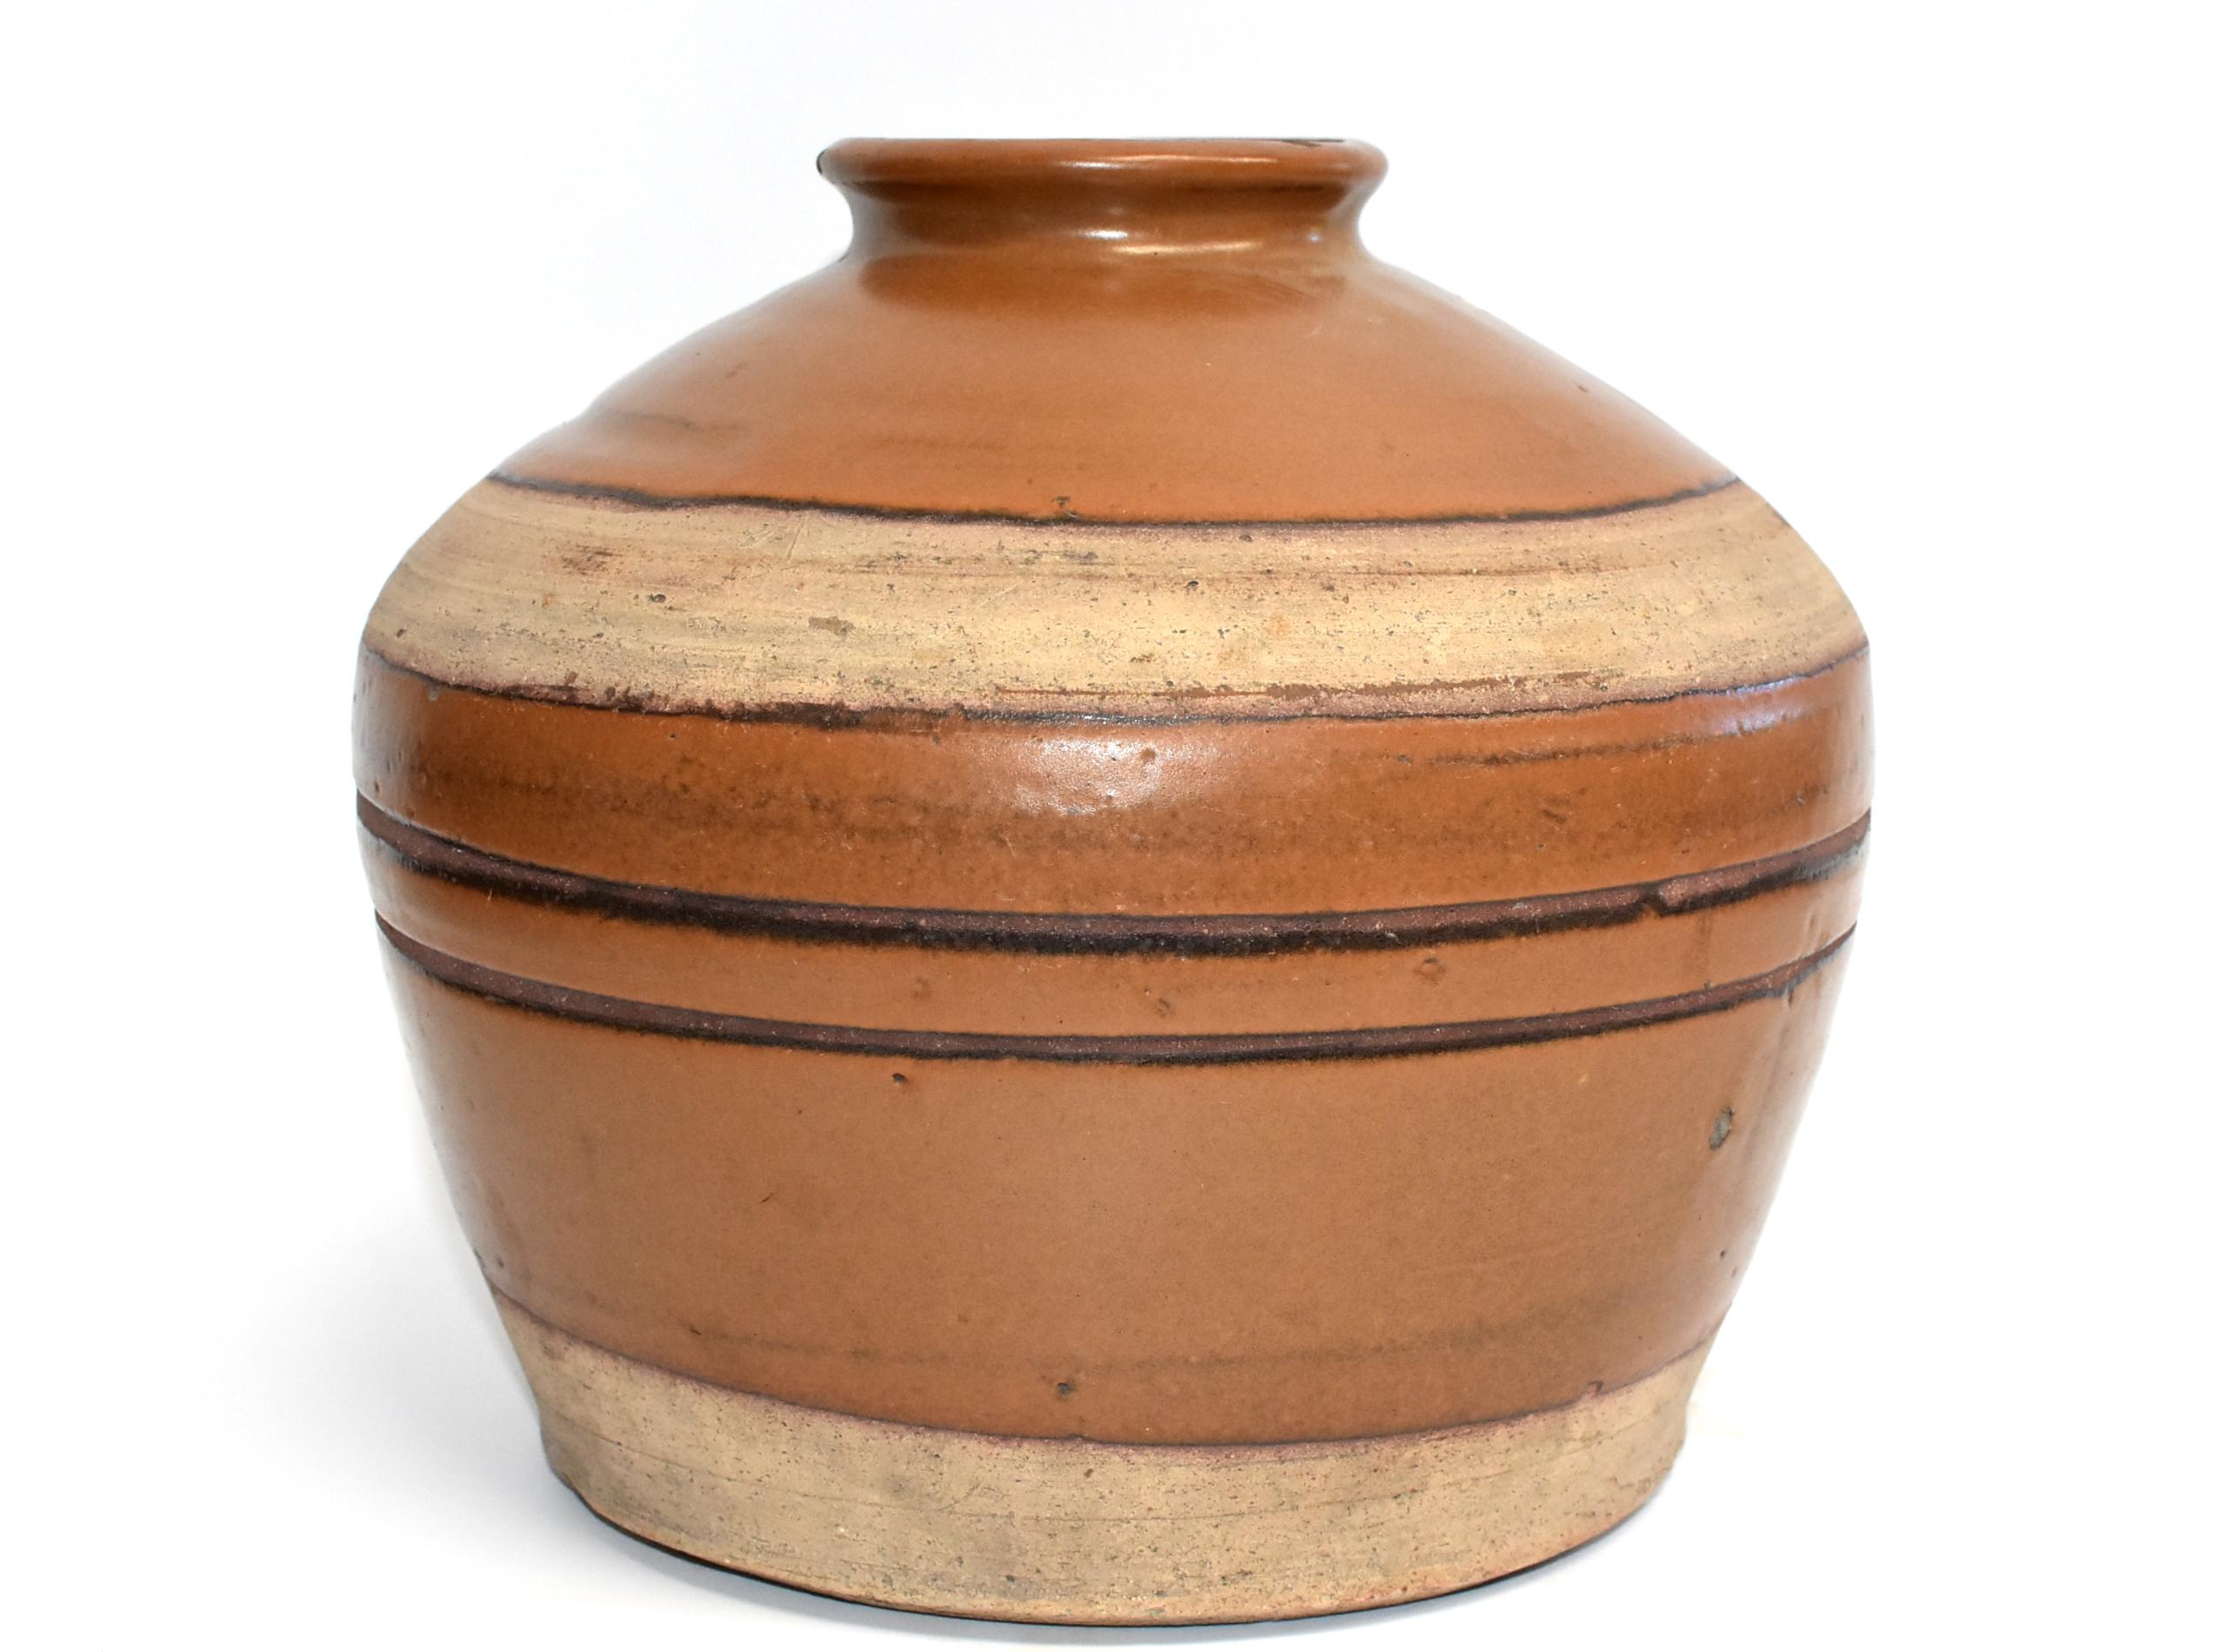 This wonderful piece is from Shan Xi province, an ancient state of China. The area is famous for producing rich, aromatic, dark vinegar. Historically these jars were used to store the prized liquids. Their rustic, artistic appeal with the beautiful